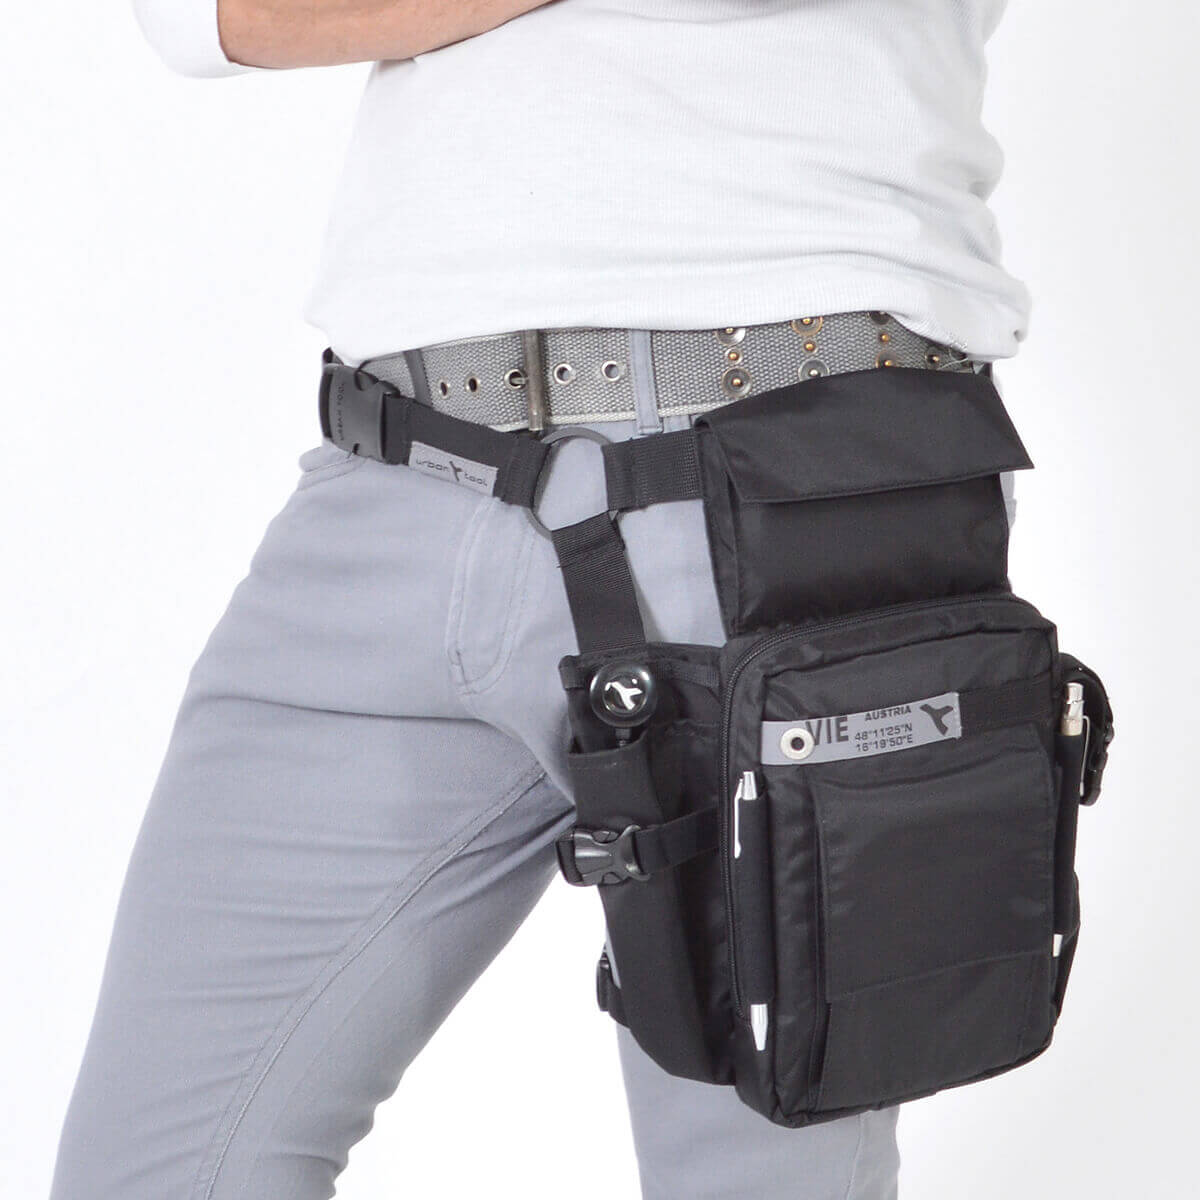 Aanval conservatief Prelude Smartphone and tablet holster waist bag URBAN TOOL ® travel legholster